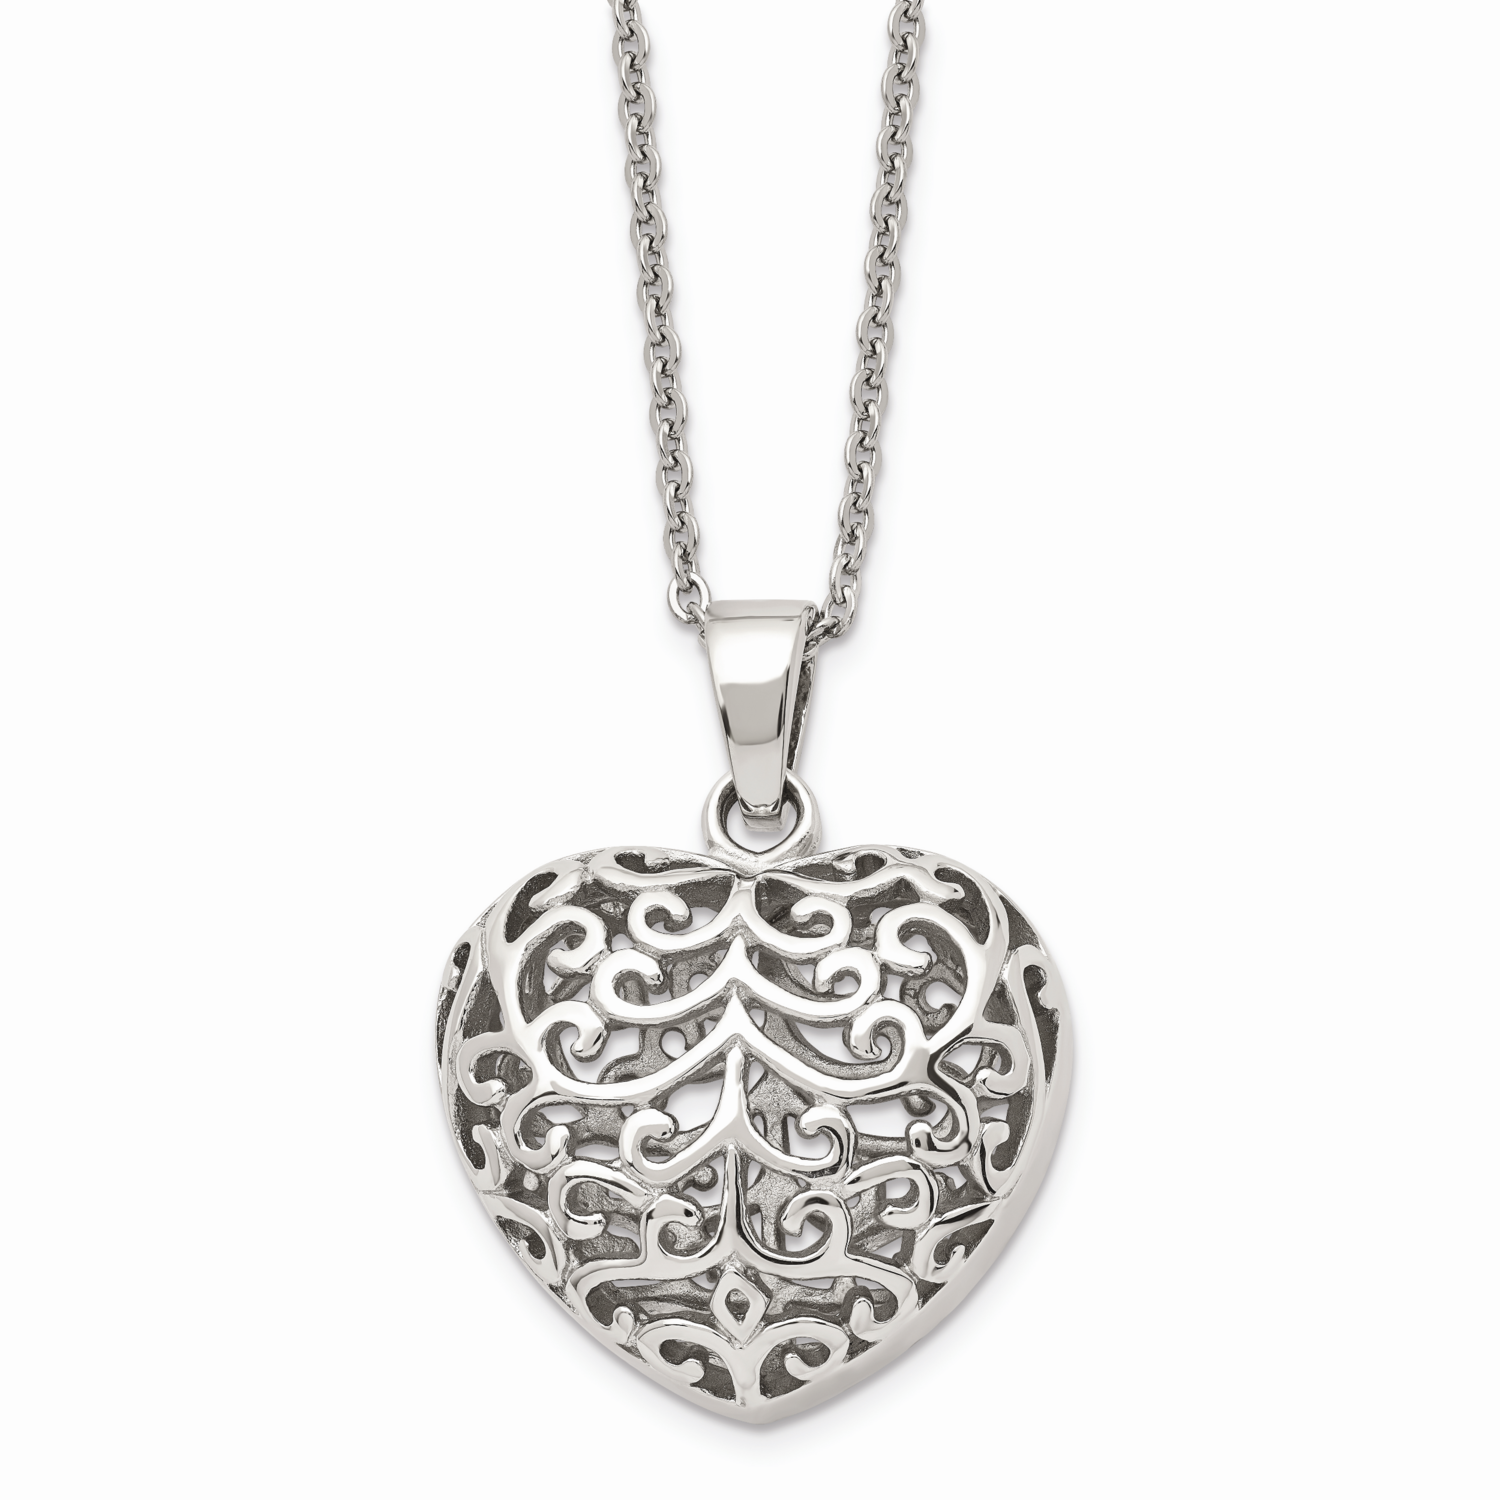 Filigree Puffed Heart Pendant Necklace Stainless Steel SRN601-22